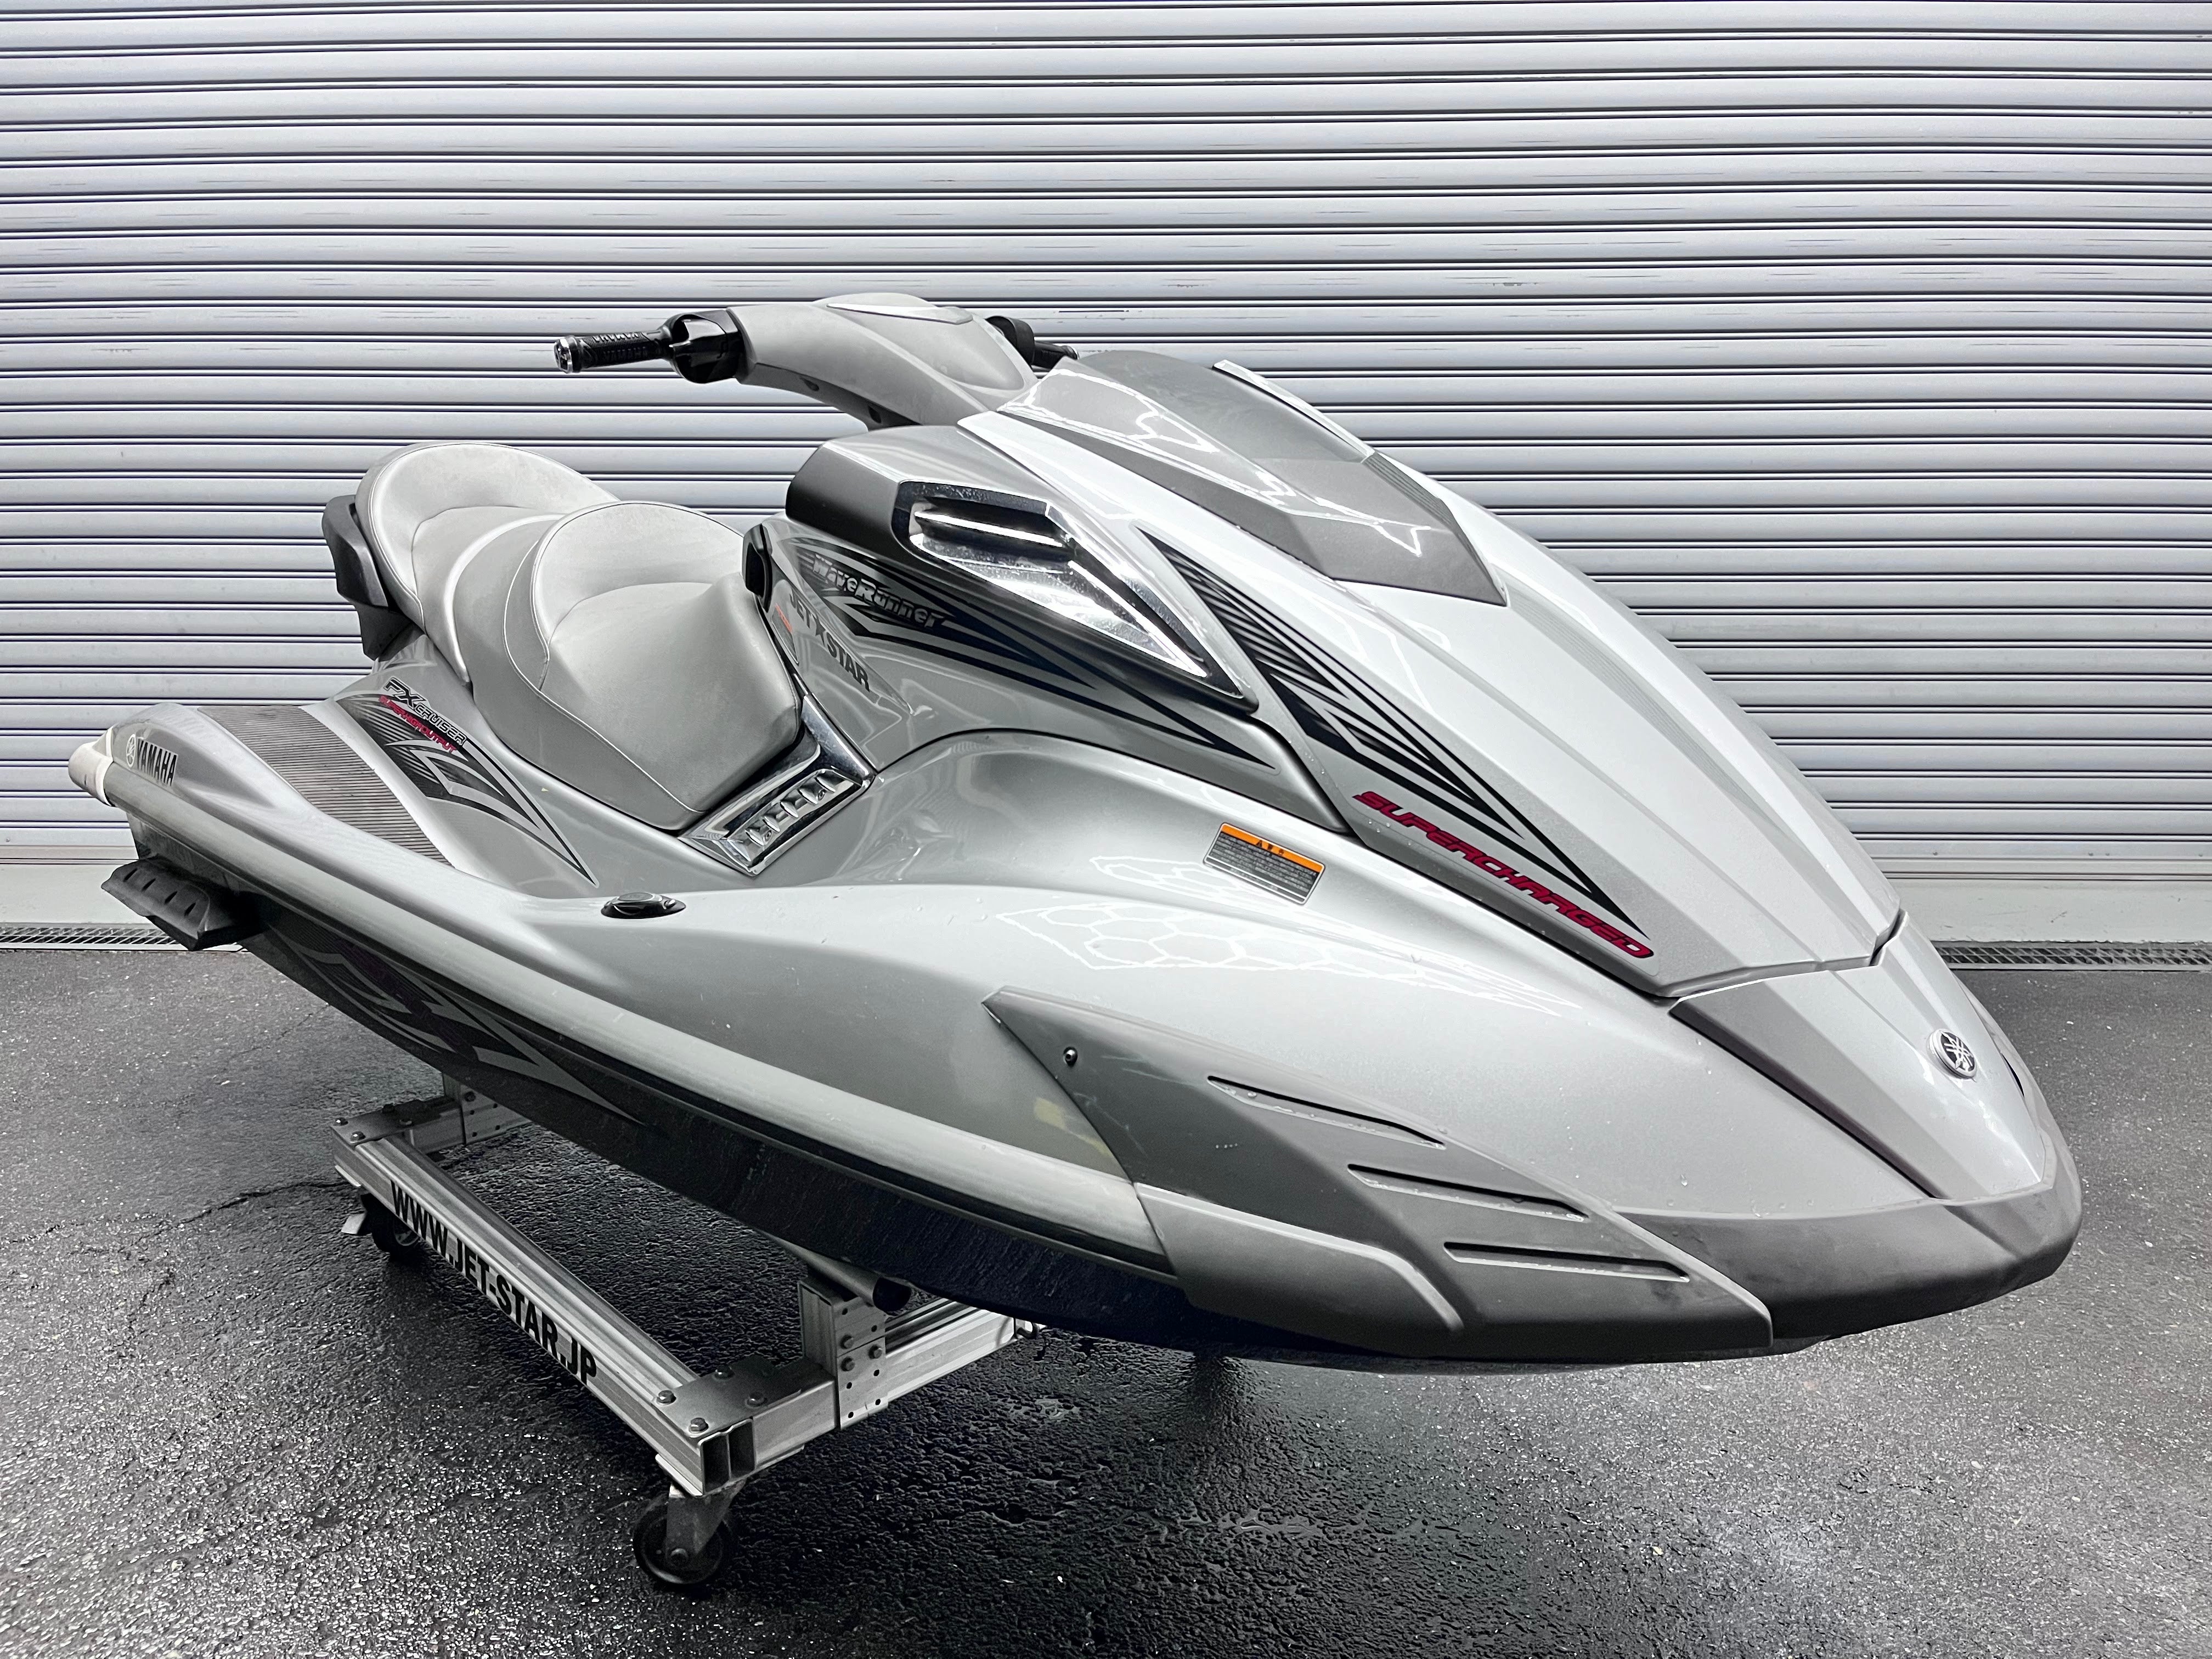 FX Cruiser SHO '10 88Hours 1800cc [Almost fresh water only use]